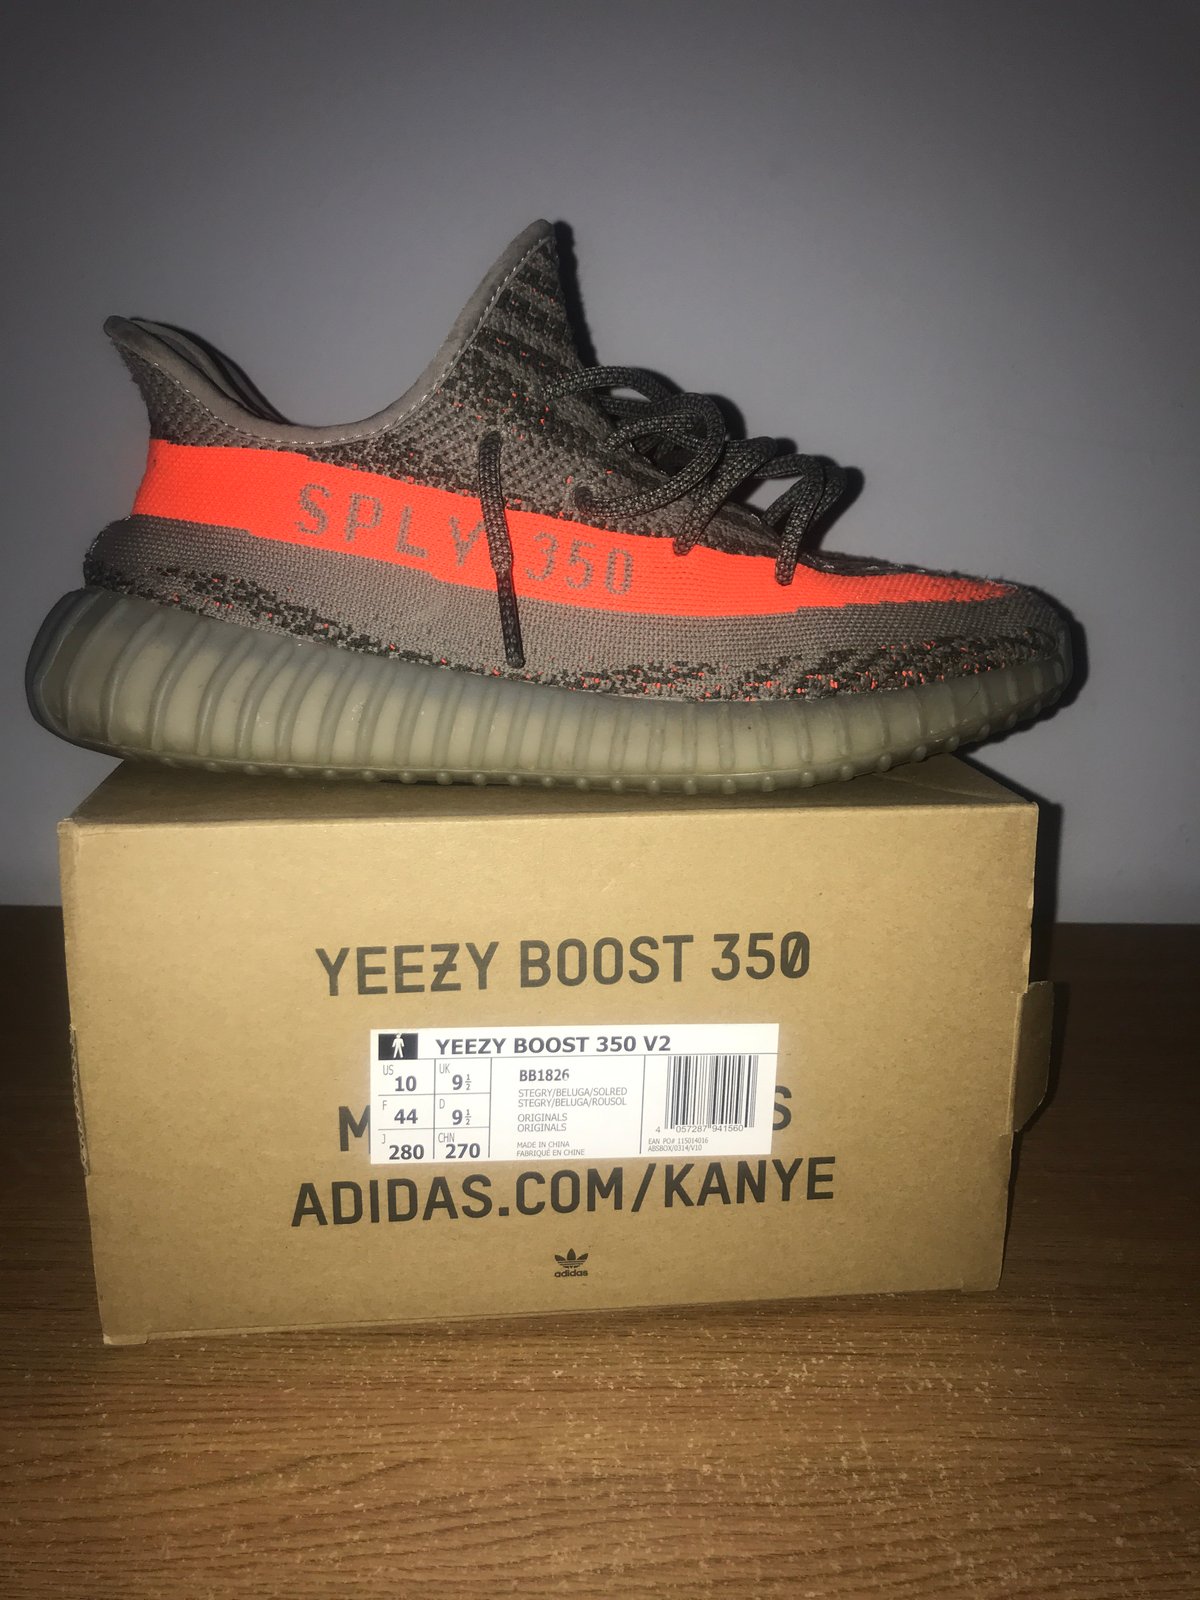 yeezy boost 350 v2 used